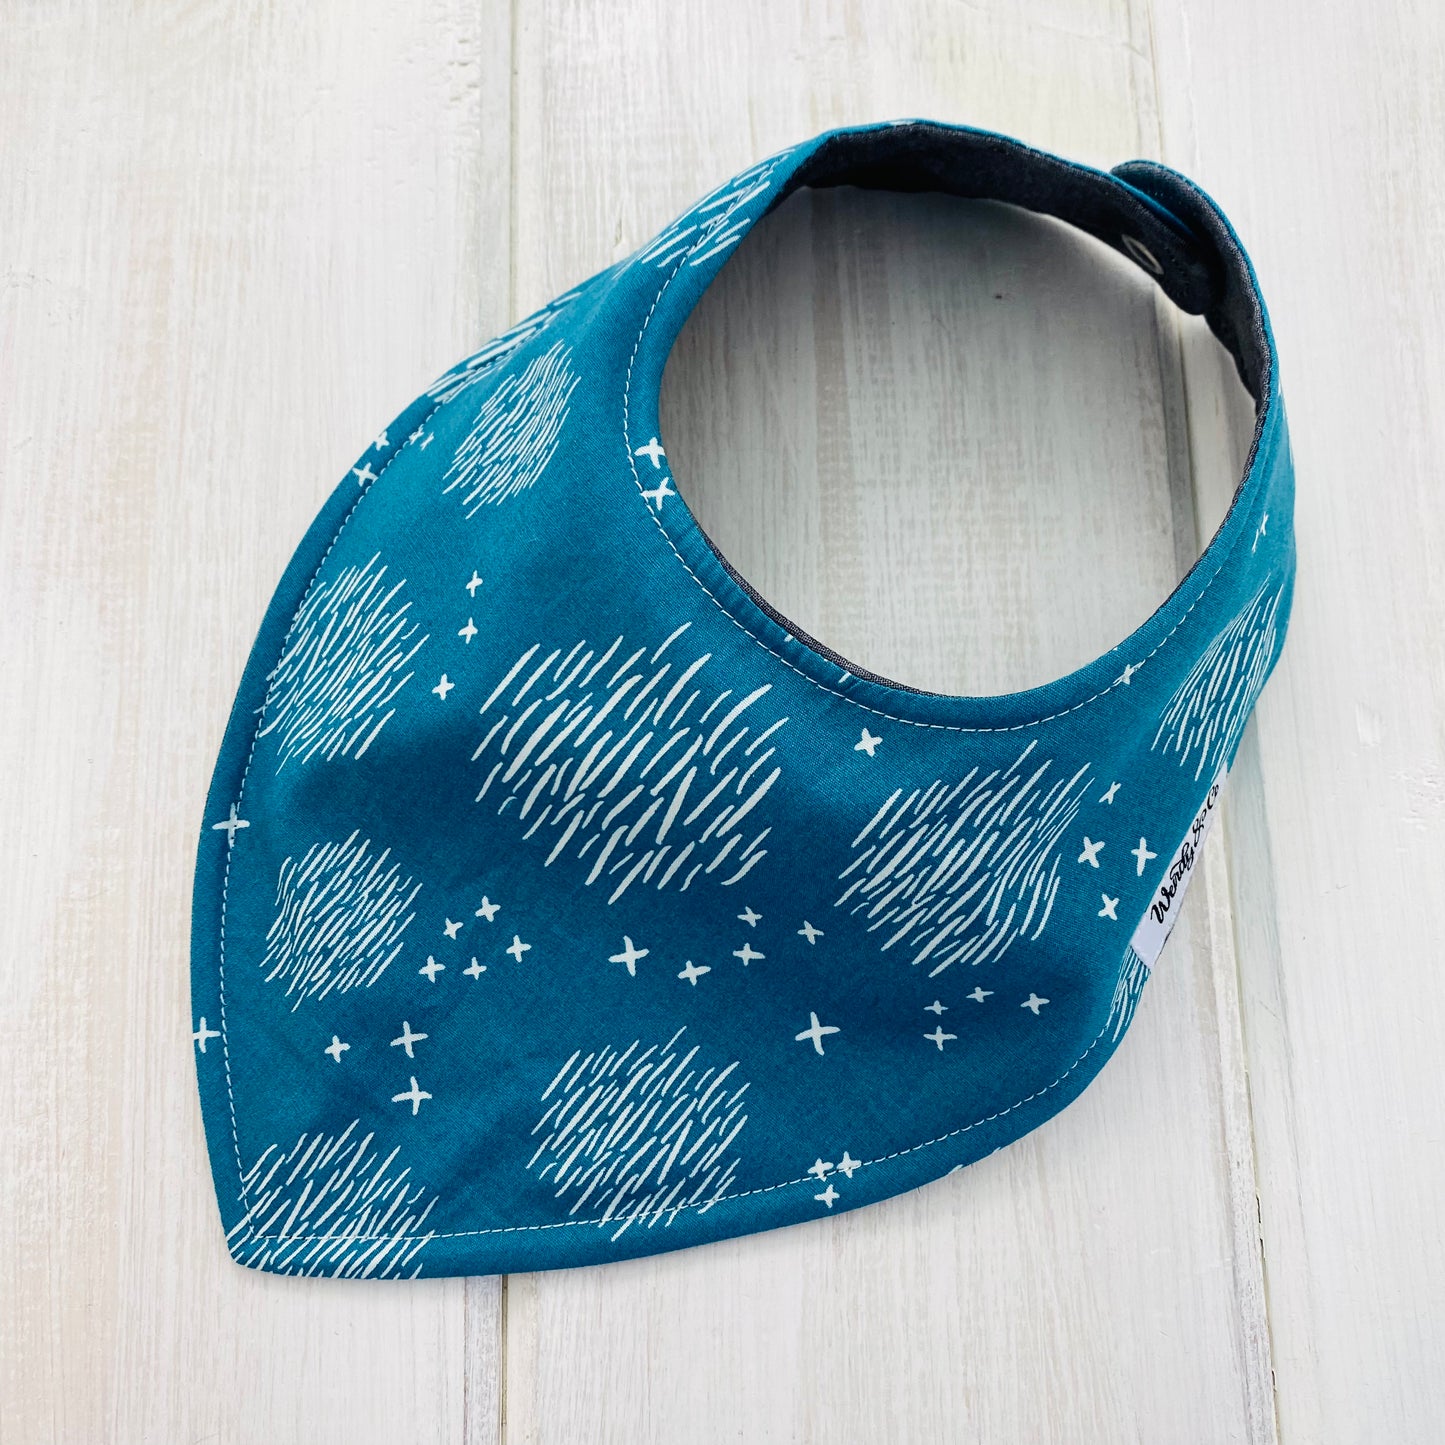 Baby bib, plain smooth front, in neutral teal print